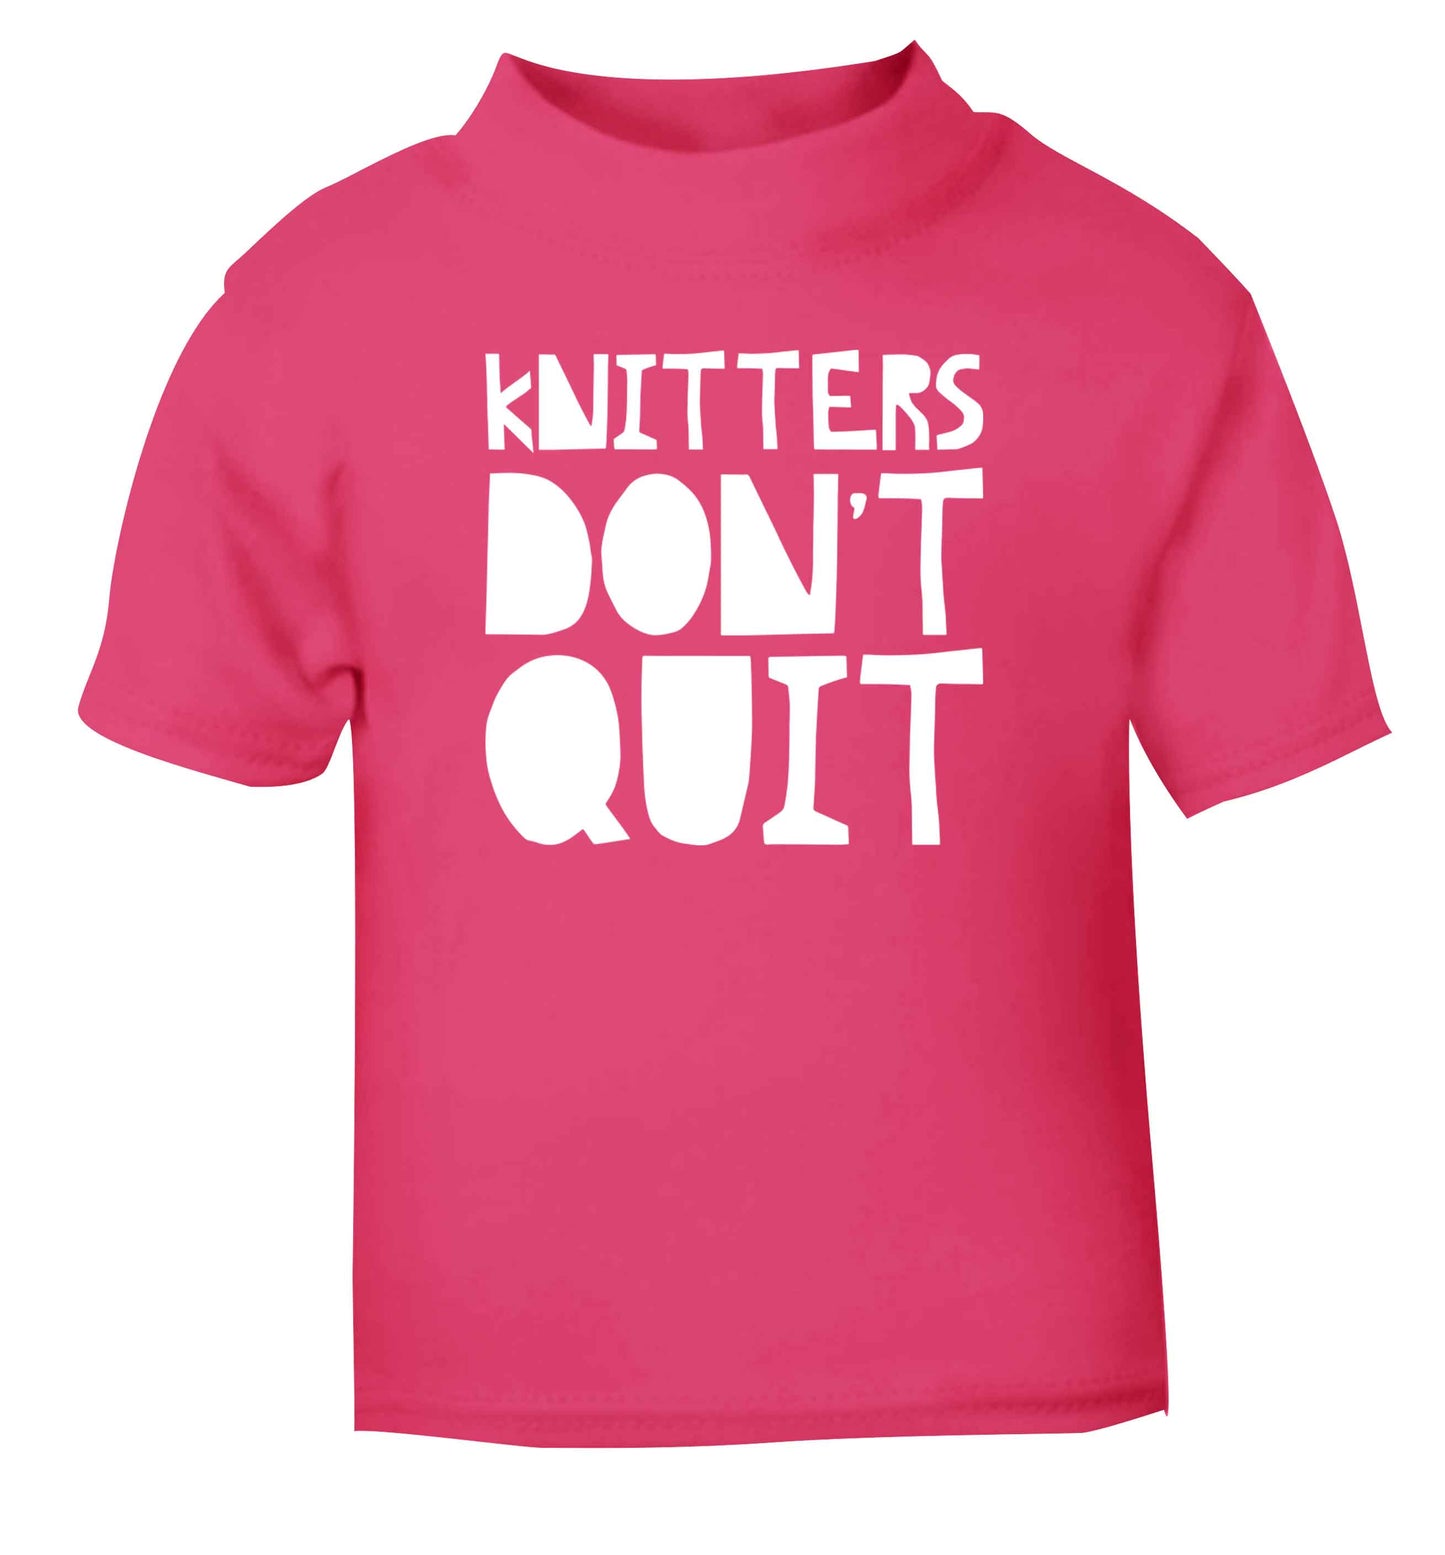 Knitters don't quit pink Baby Toddler Tshirt 2 Years